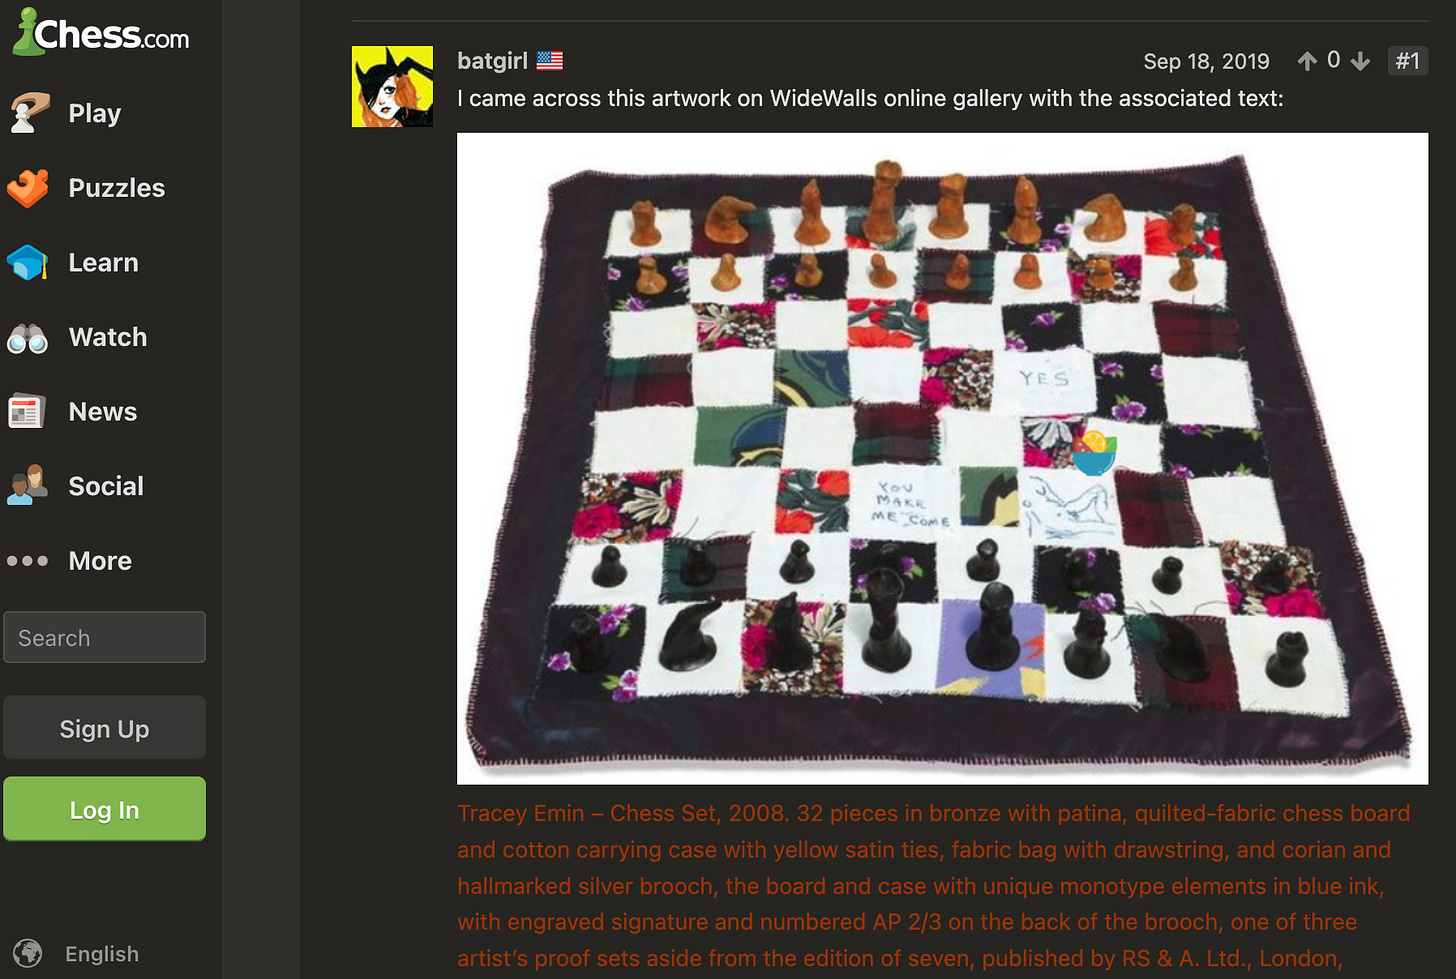 chess.com is not a fan of tracey emin's chess set